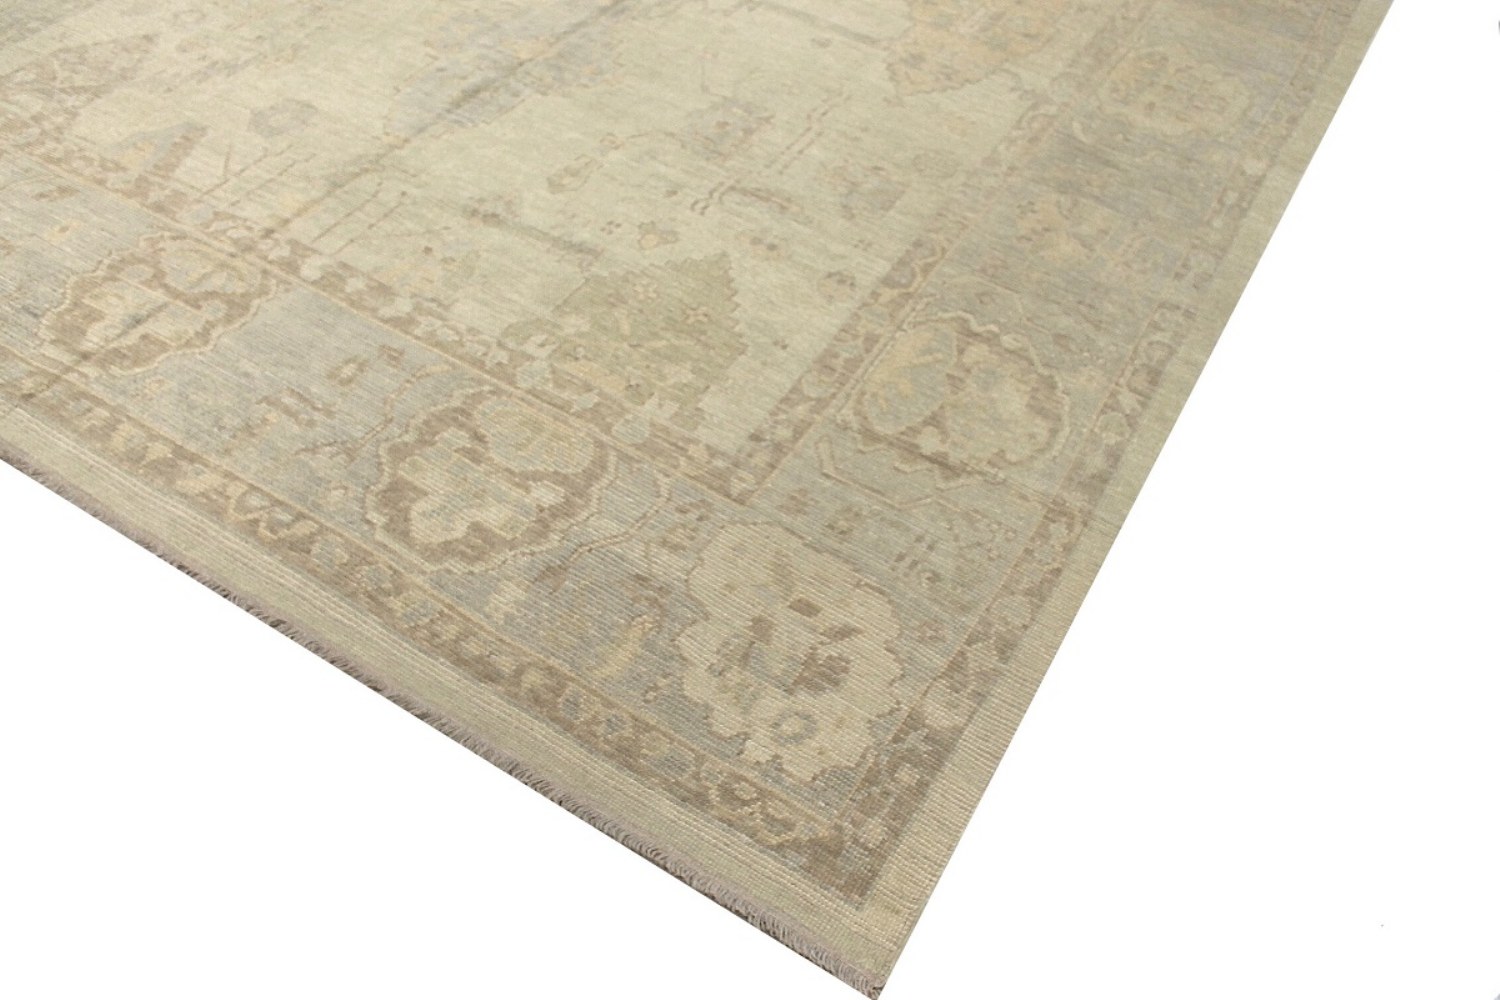 OVERSIZE Oushak Hand Knotted Wool Area Rug - MR15470